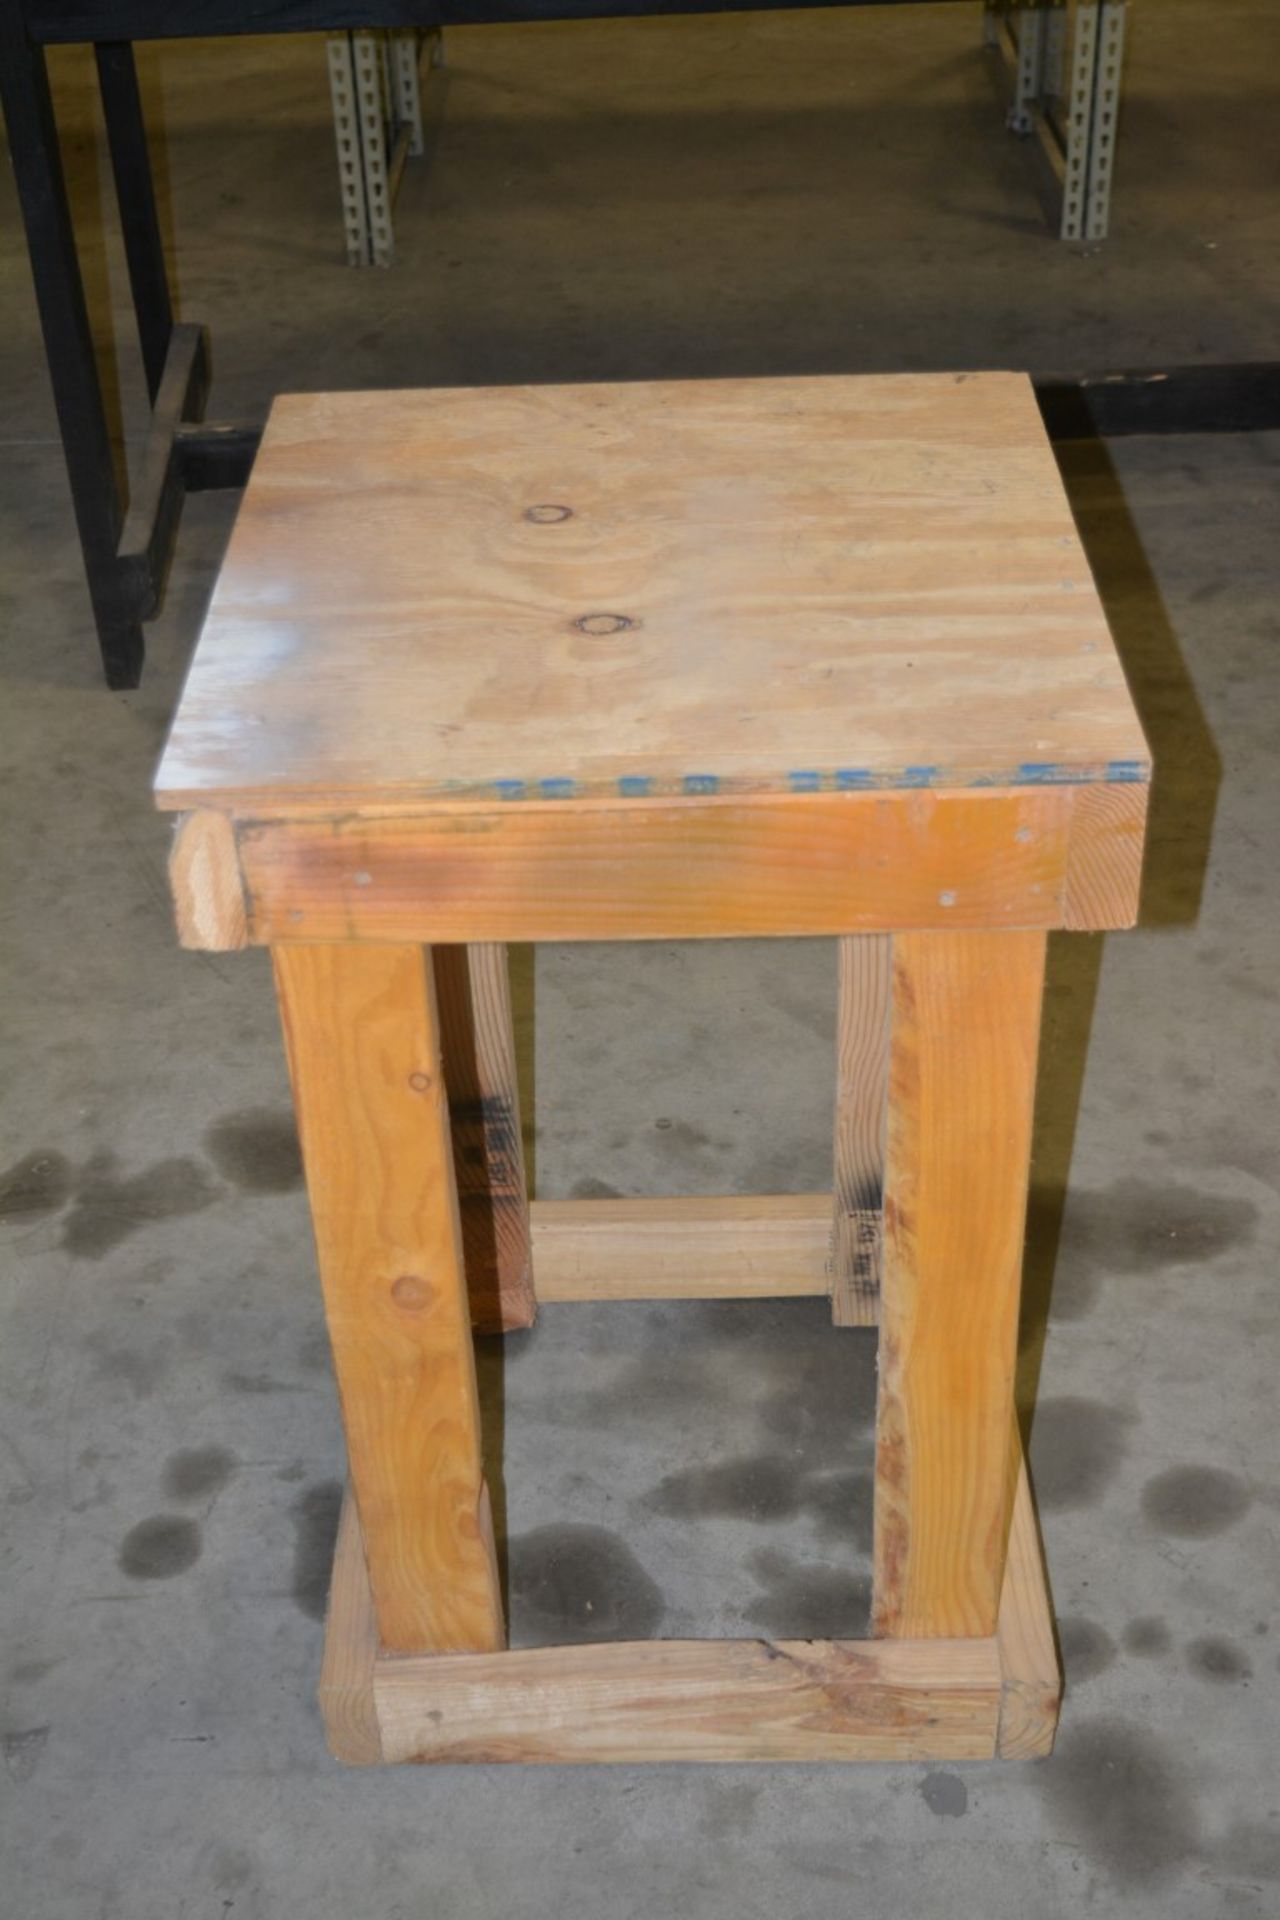 SMALL WOODEN WOEK TABLE